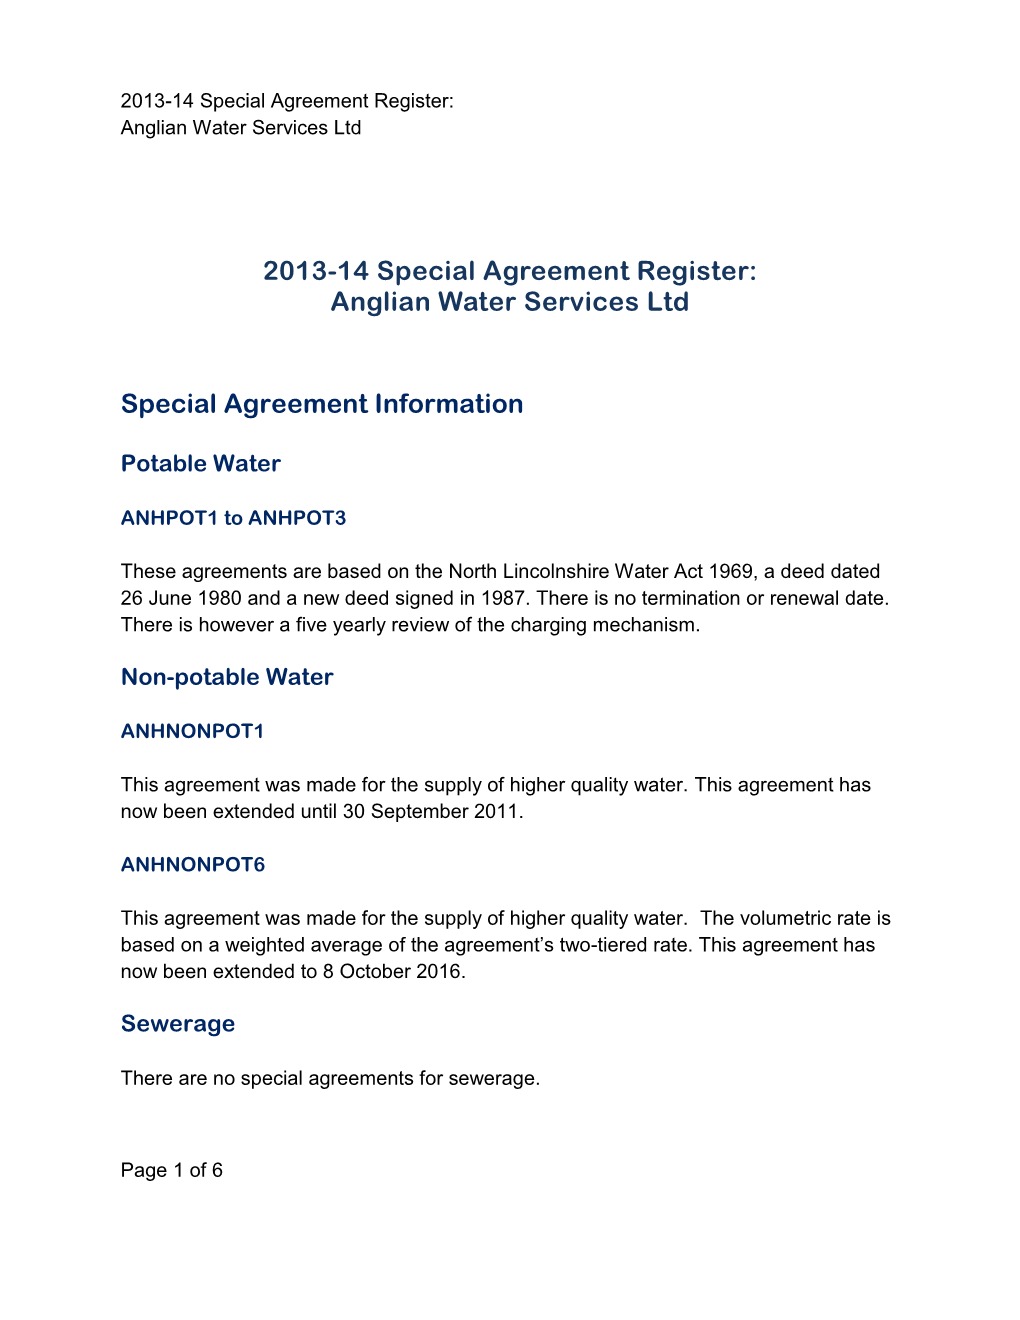 Anglian Water Services Ltd Special Agreement Information